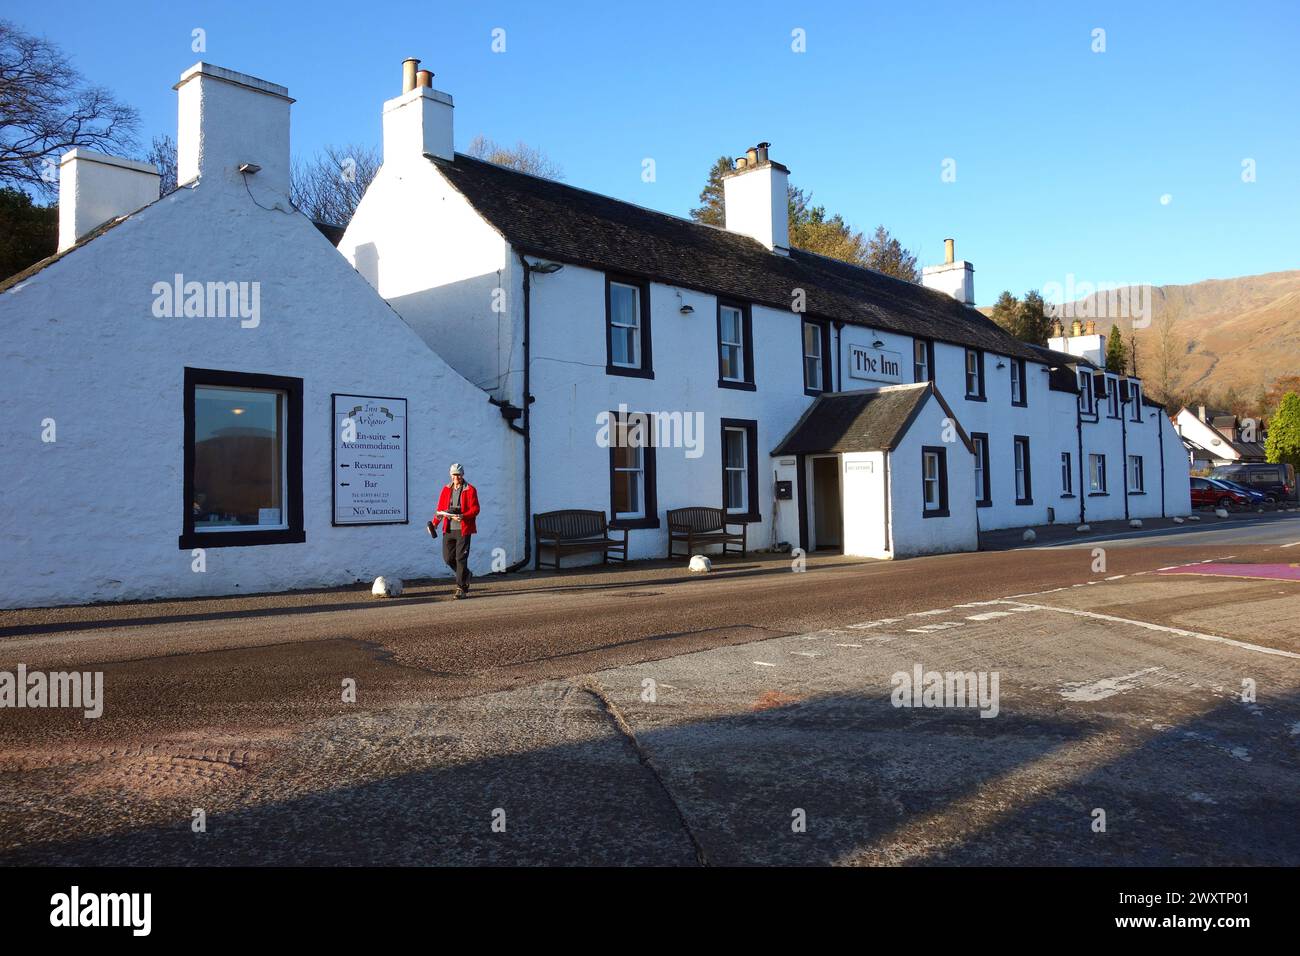 Man (Hiker) Walking from The Inn at Corran in Ardgour, Scottish North West Highlands, Scotland, UK. Stock Photo